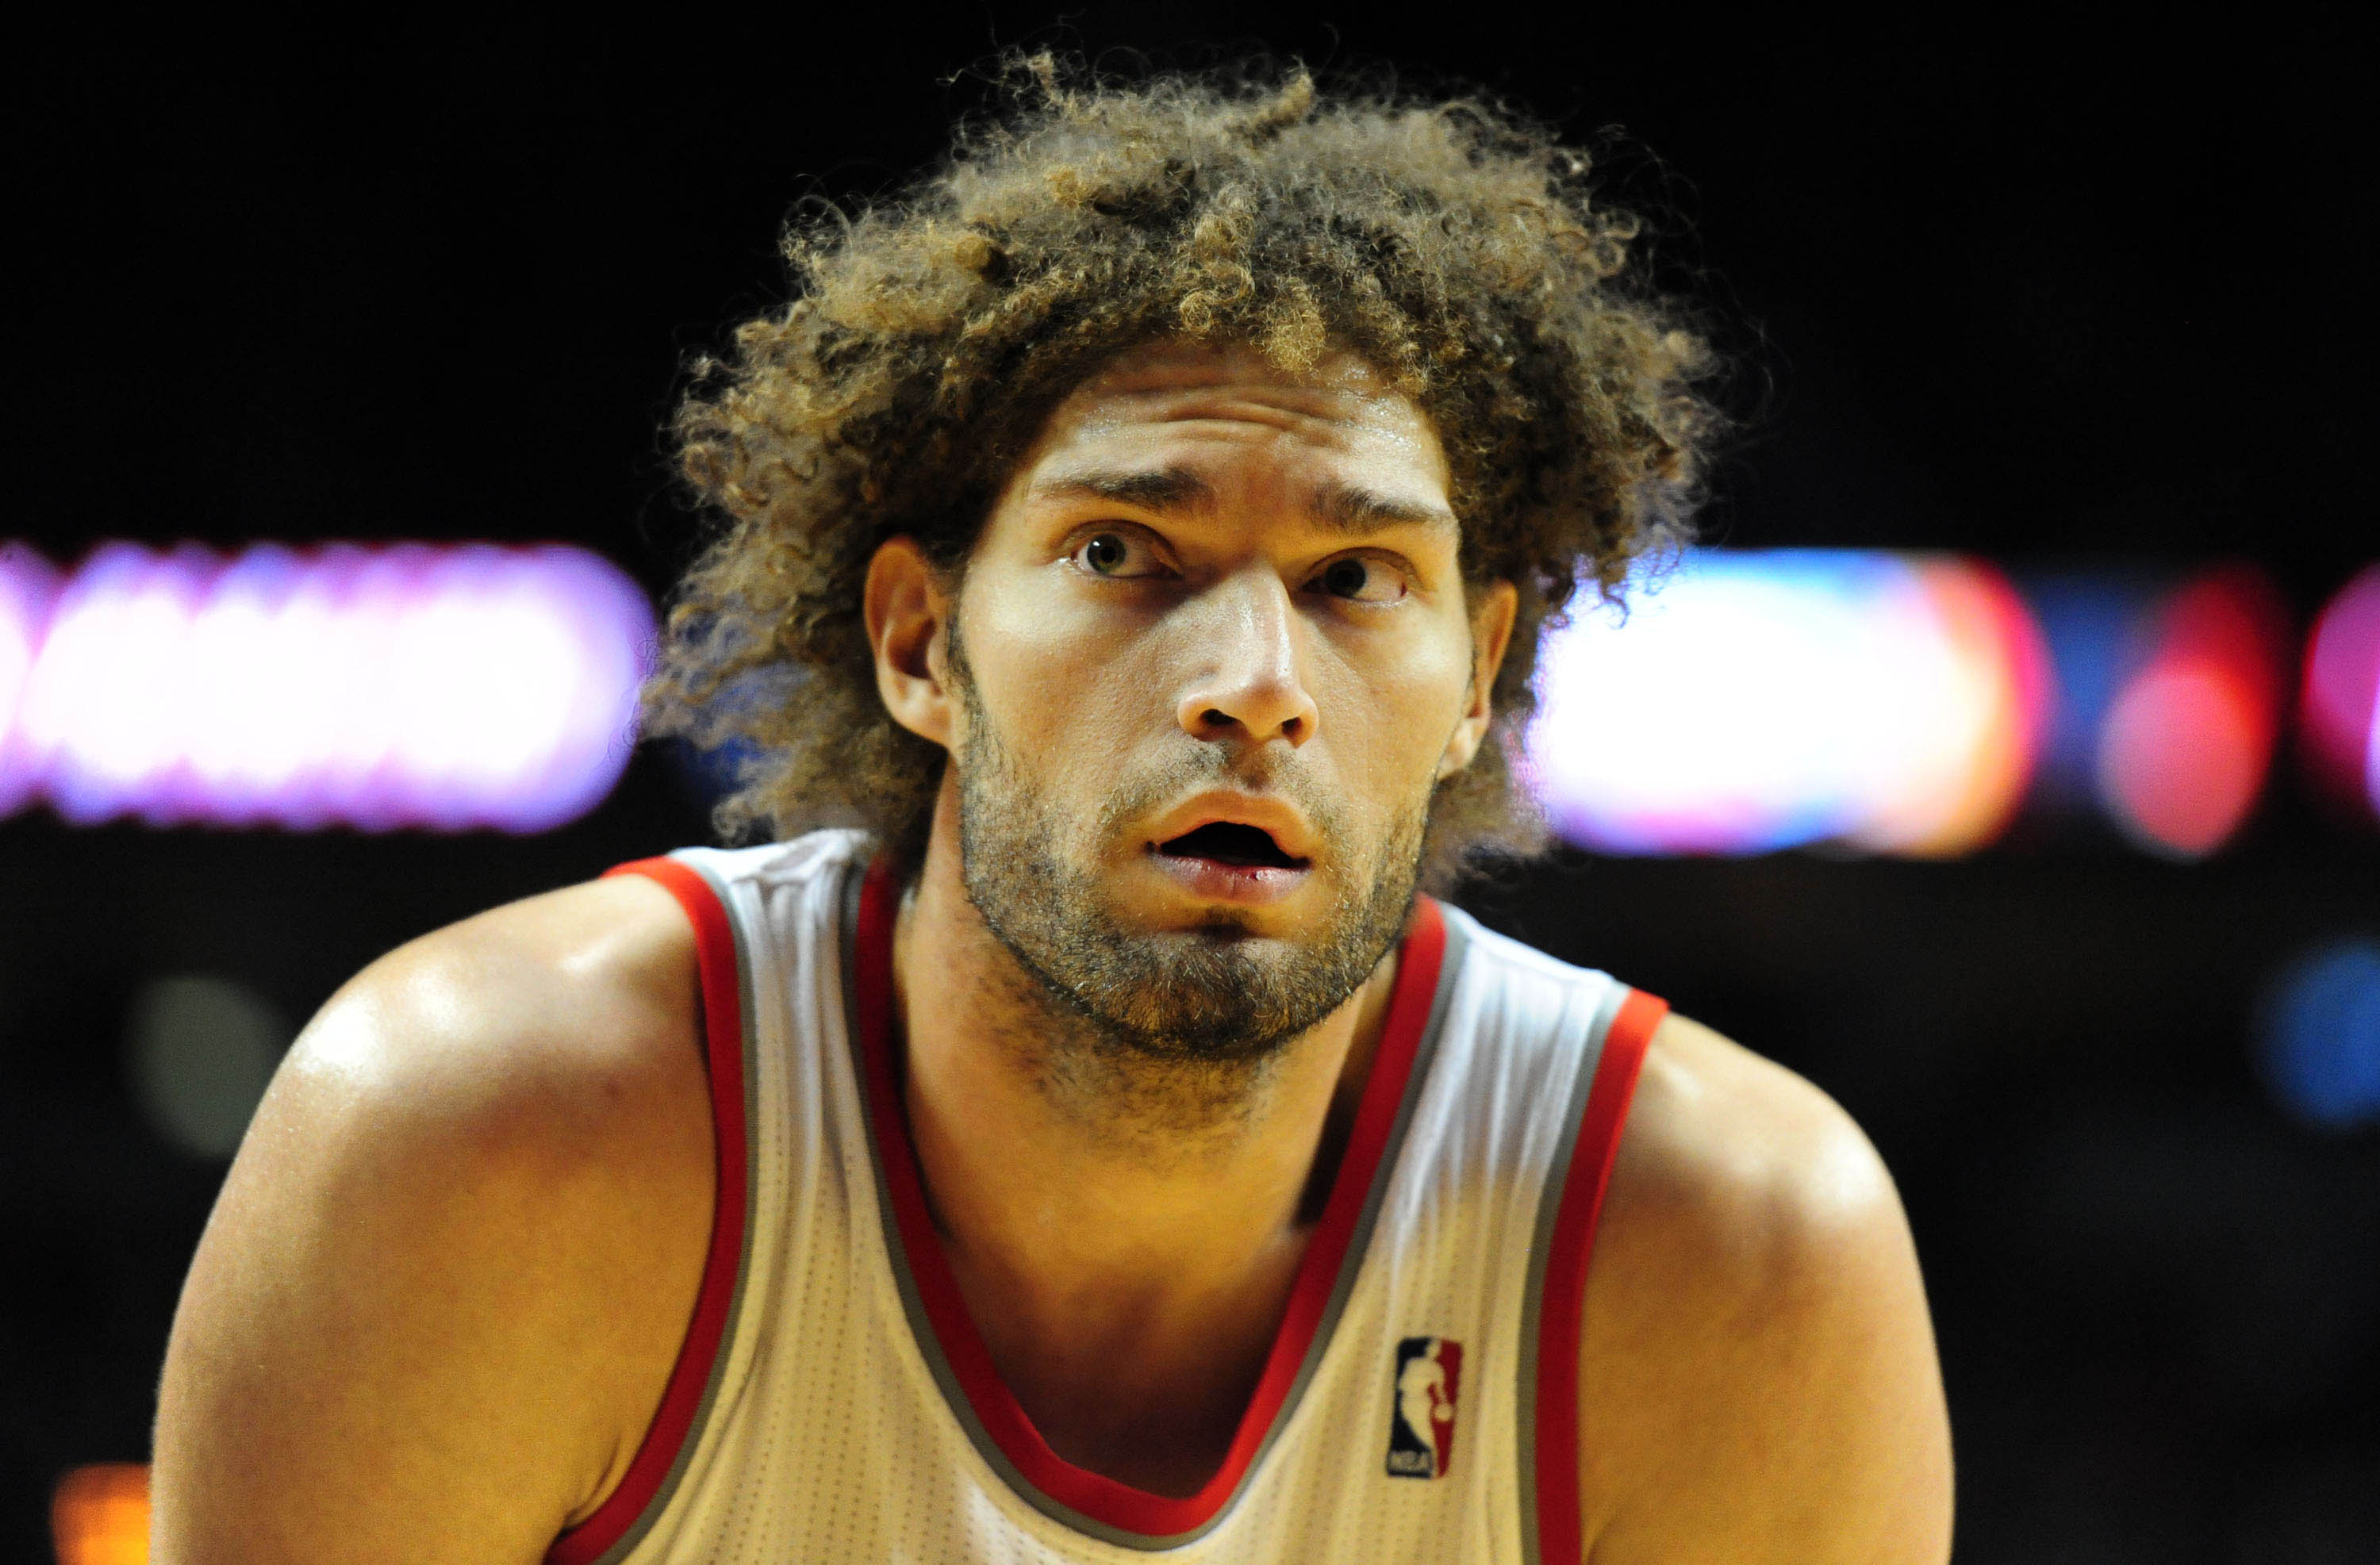 Robin Lopez really wanted a New Jersey Swamp Dragons jersey, so we